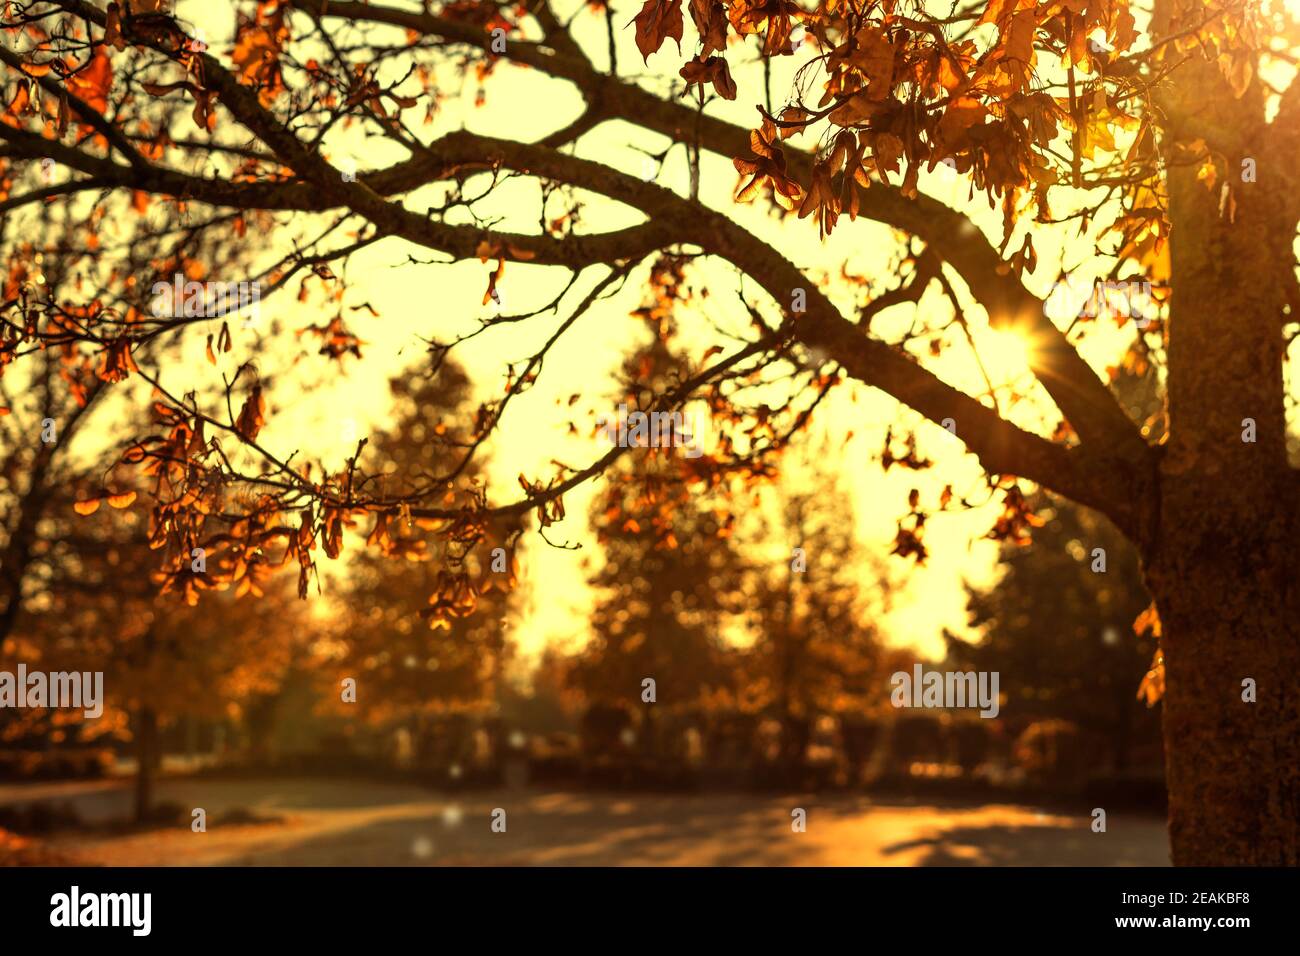 autumn concept, sunrise with autumnal colorful leaves on branches from the tree. Stock Photo